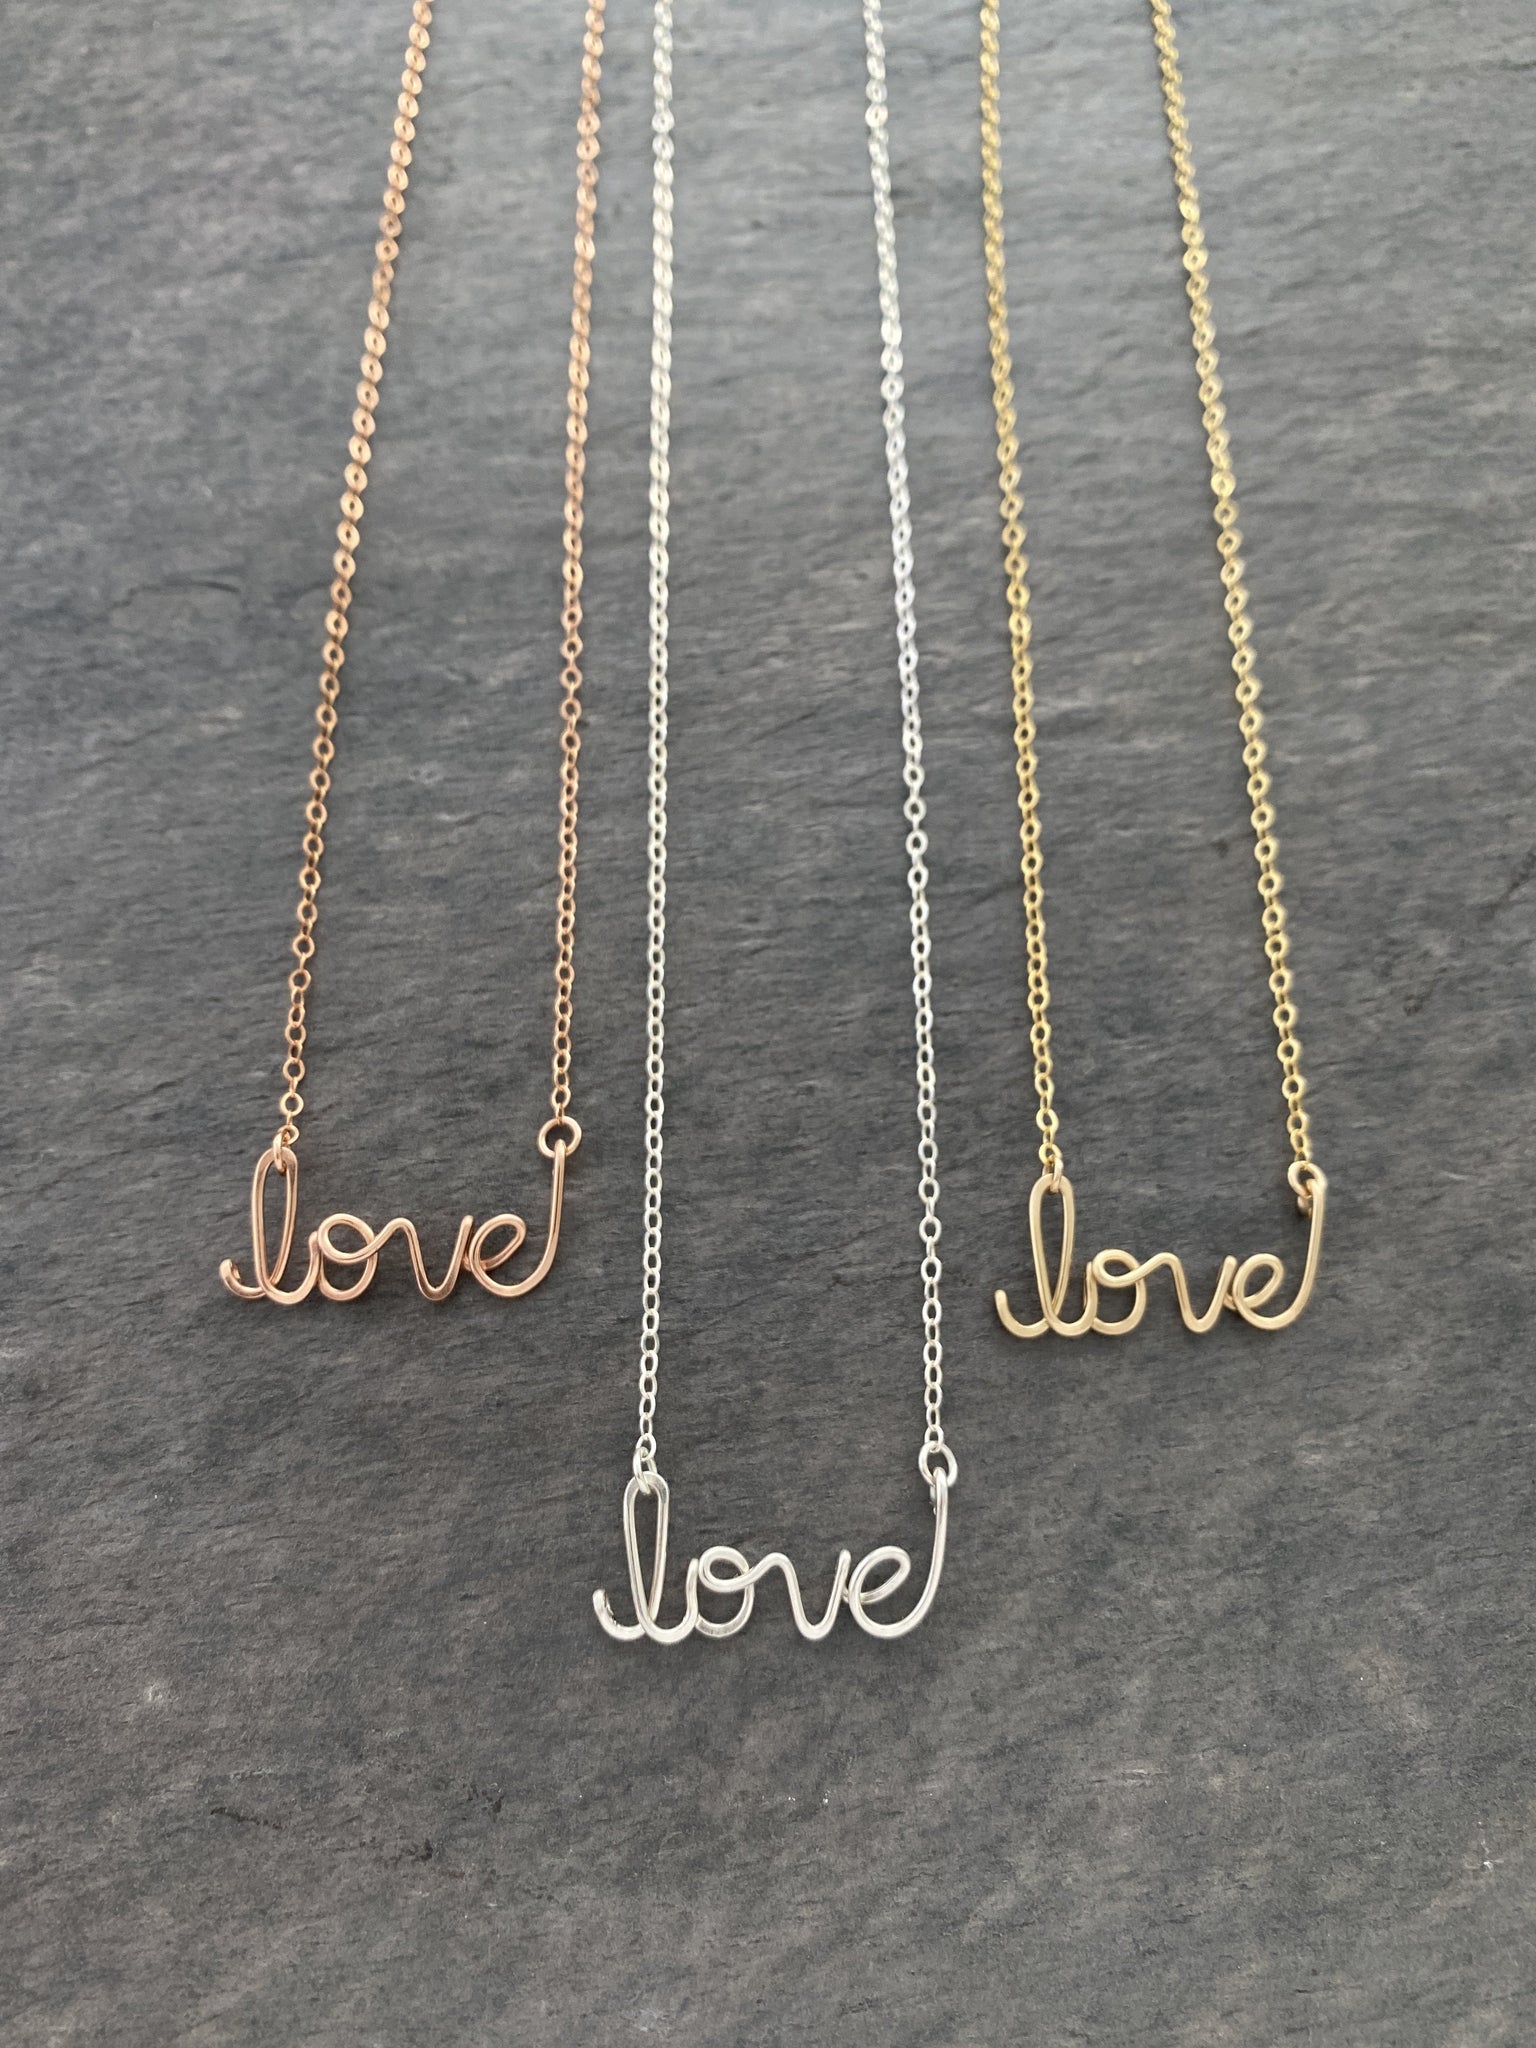 Love Necklace - Made For Love Jewelry